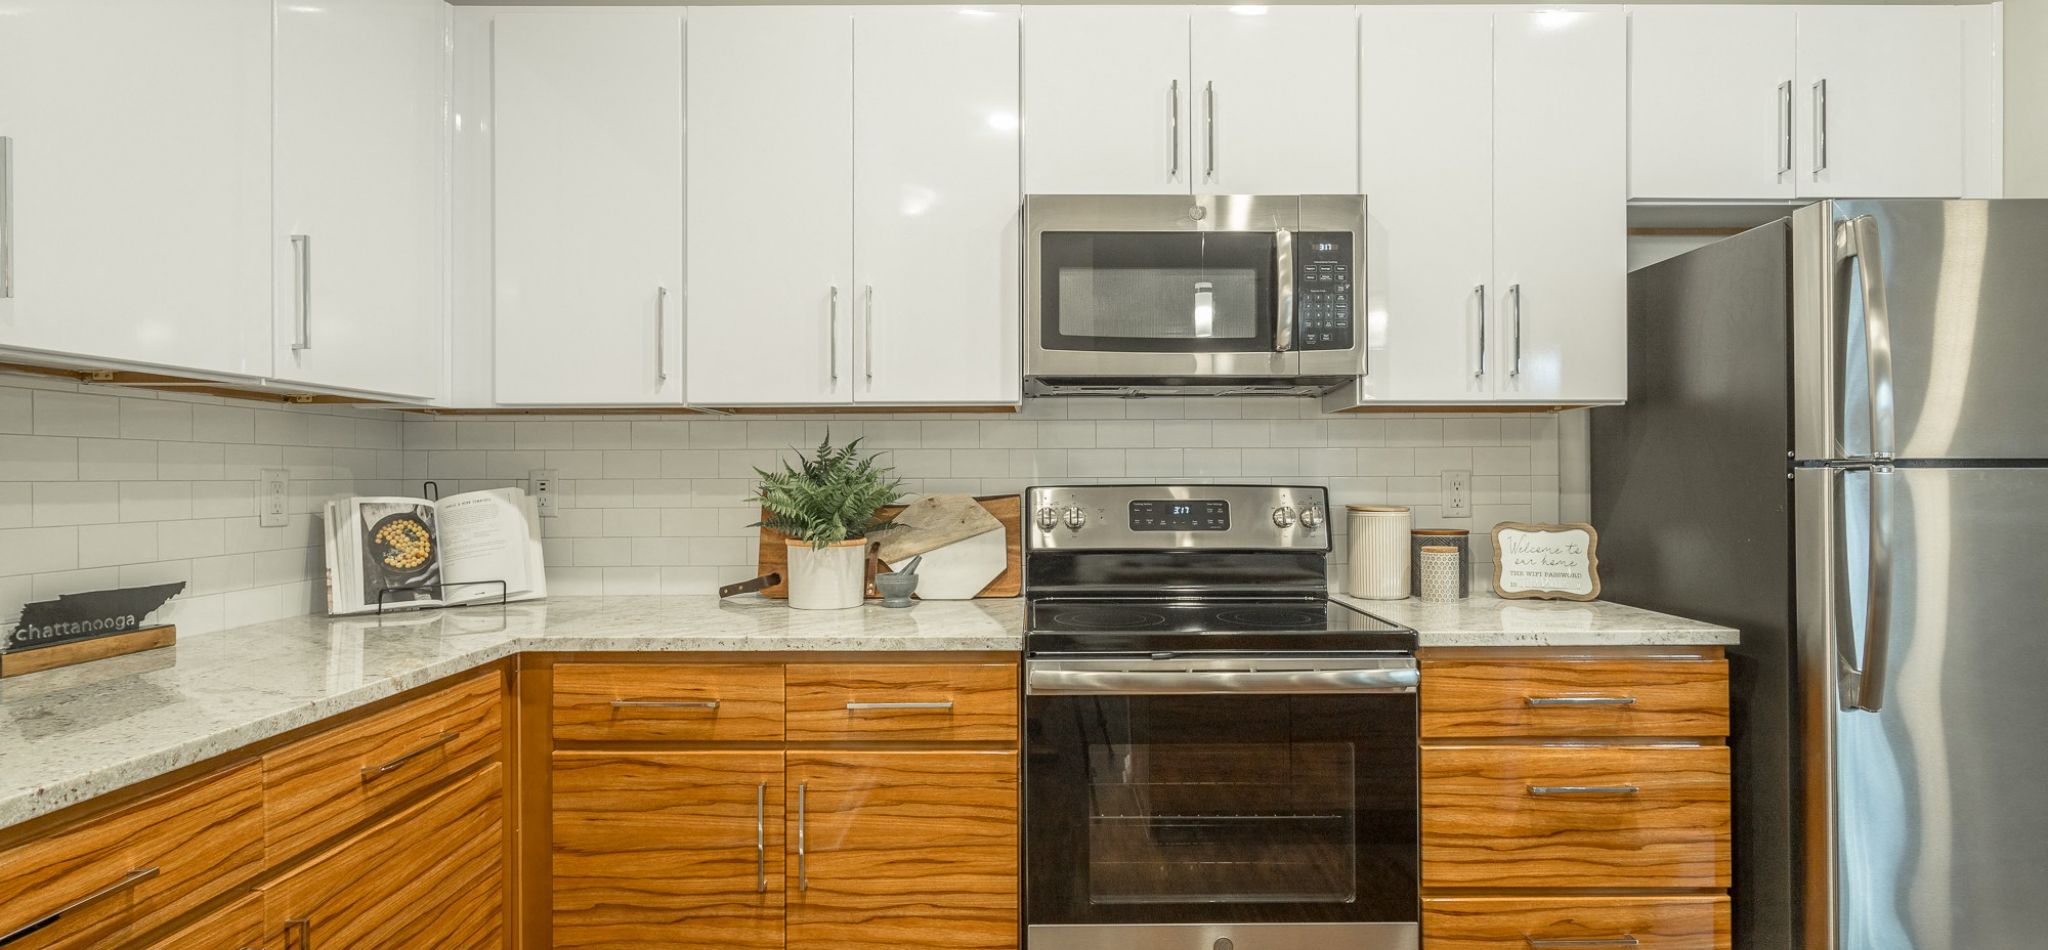 Hawthorne at the W apartment kitchen with granite countertops, stainless steel appliances, and ample cabinet storage